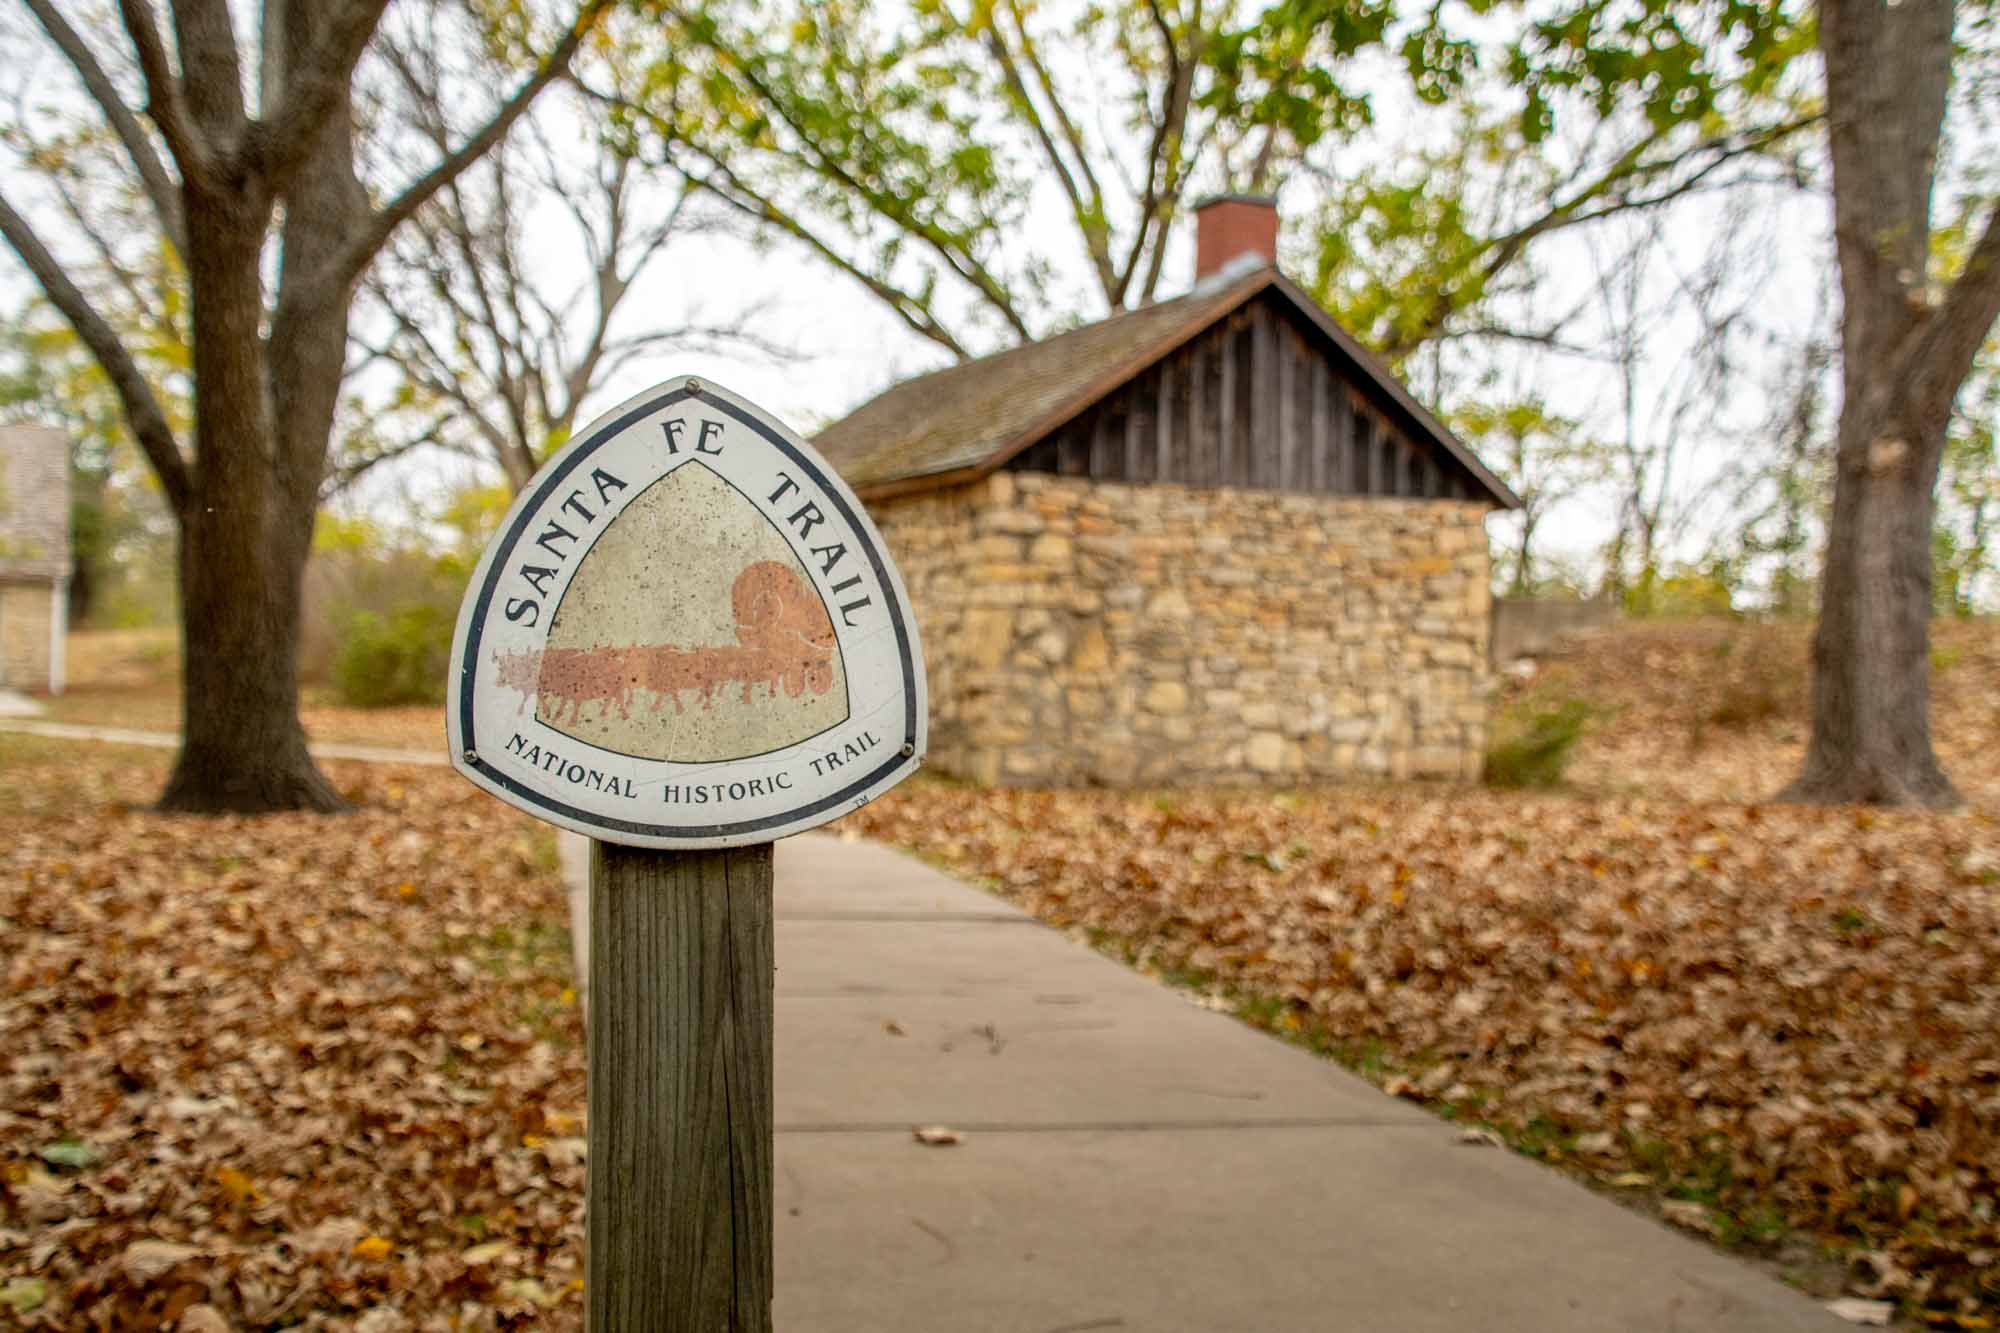 Sign reading "Santa Fe Trail National Historic Trail" in front of  limestone cabin